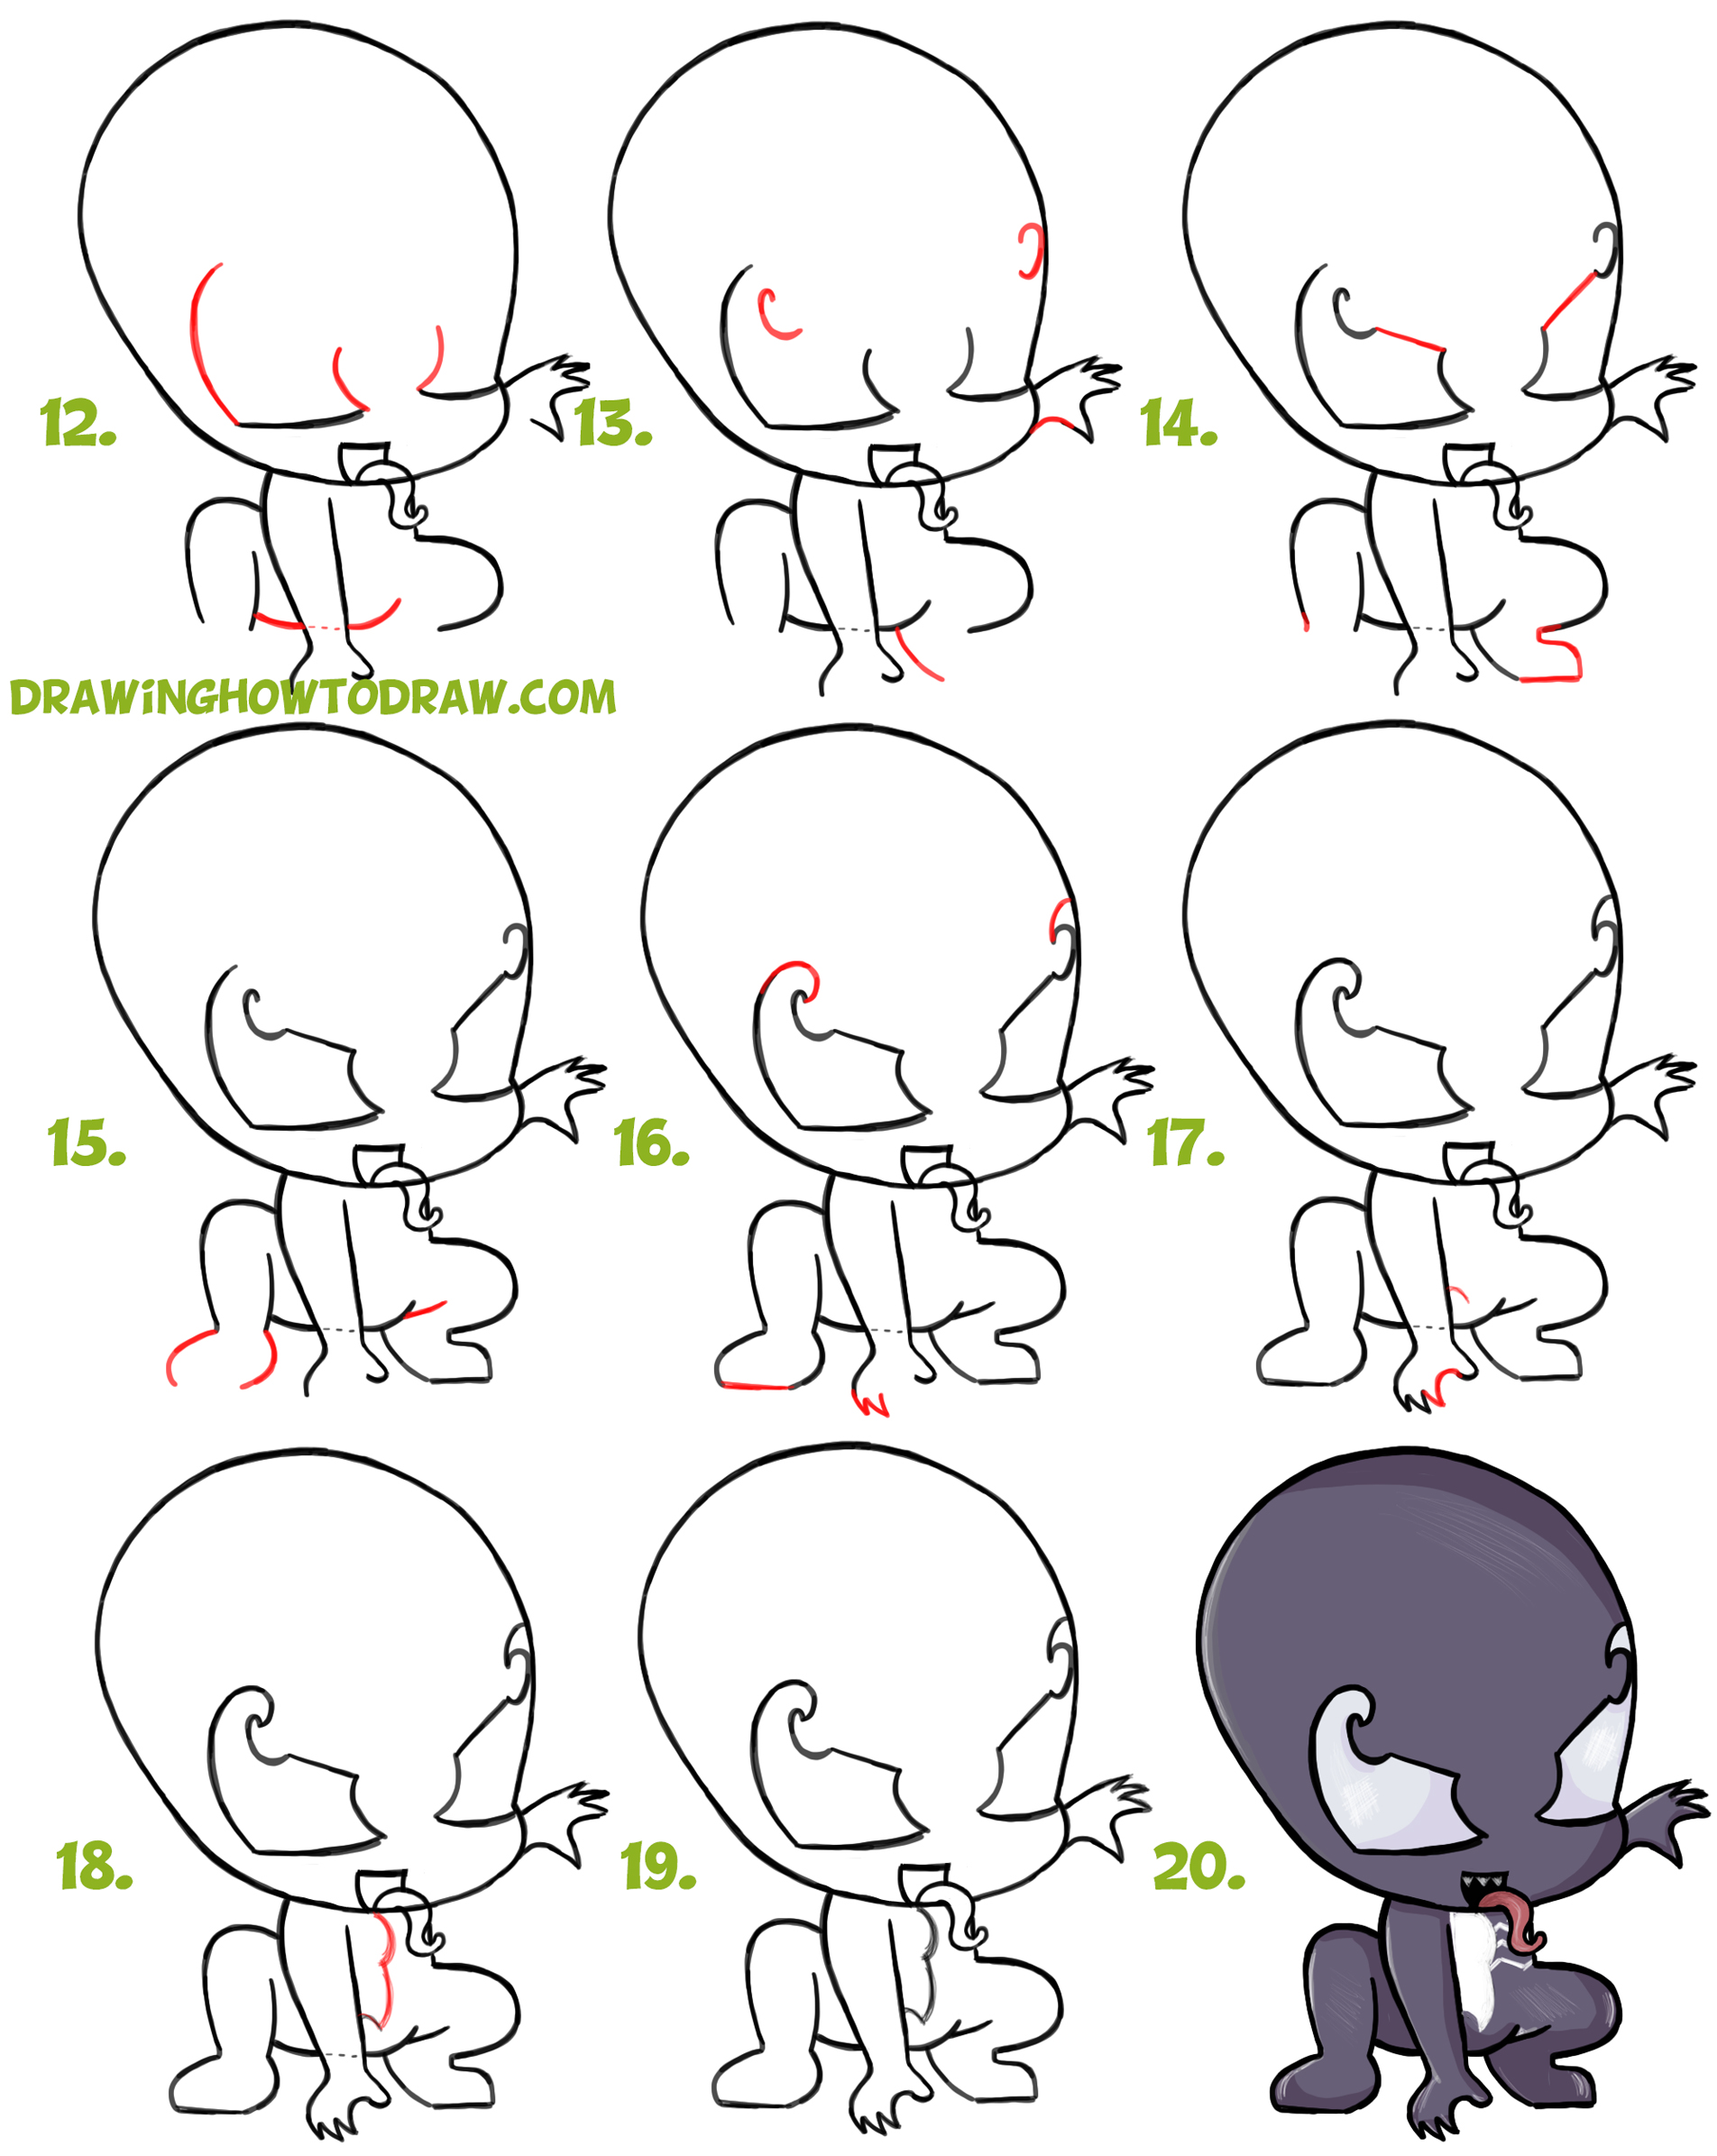 How To Draw Chibi Cute Venom From Marvel Spiderman Easy Step By Step Drawing Tutorial For Kids Beginners How To Draw Step By Step Drawing Tutorials